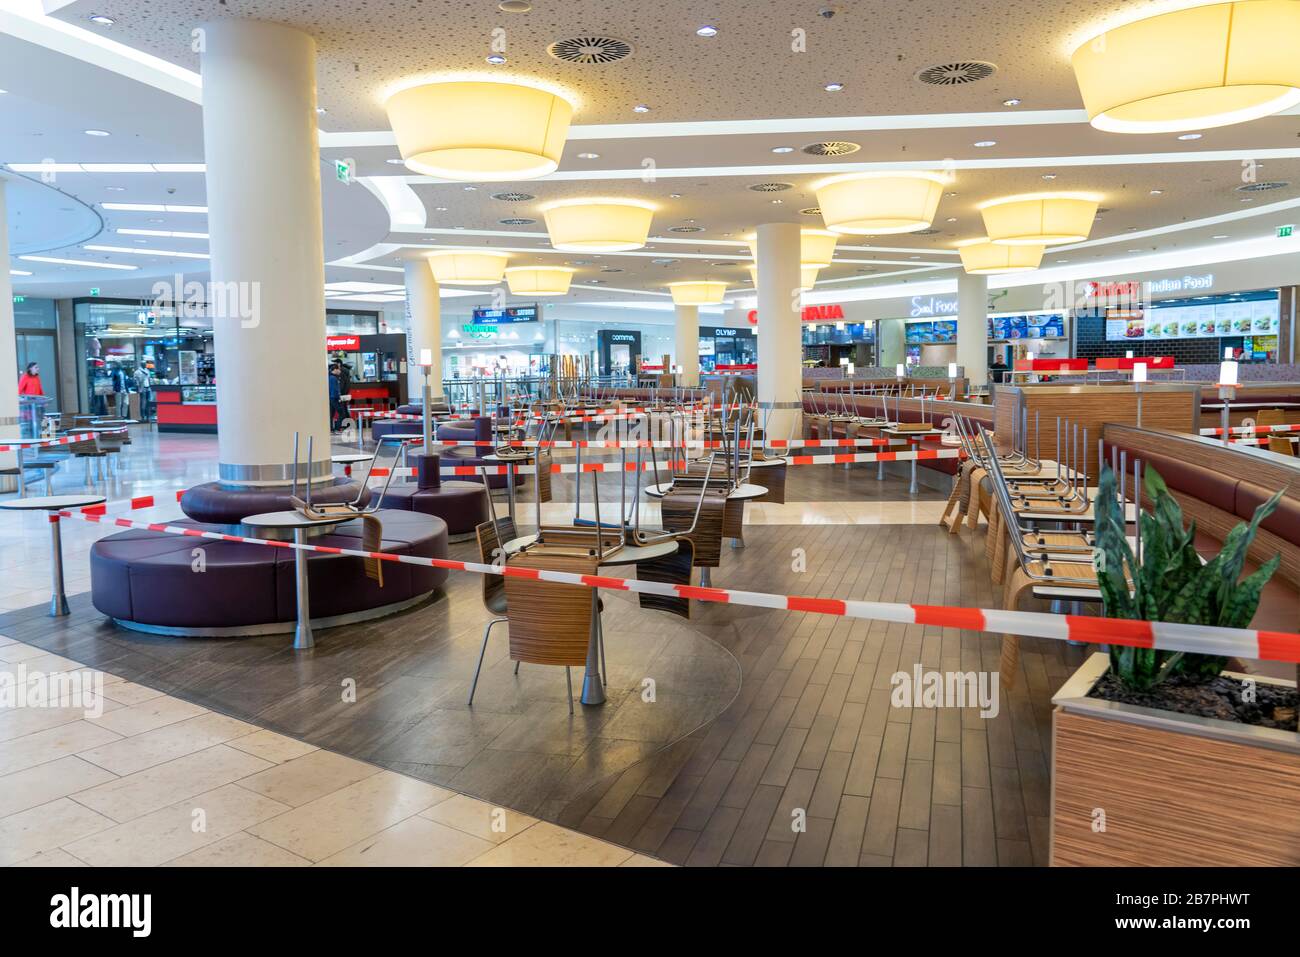 Effects of the coronavirus pandemic in Germany, Essen, Limbecker Platz shopping centre, cordoned-off areas, seating, dining tables for fast food resta Stock Photo